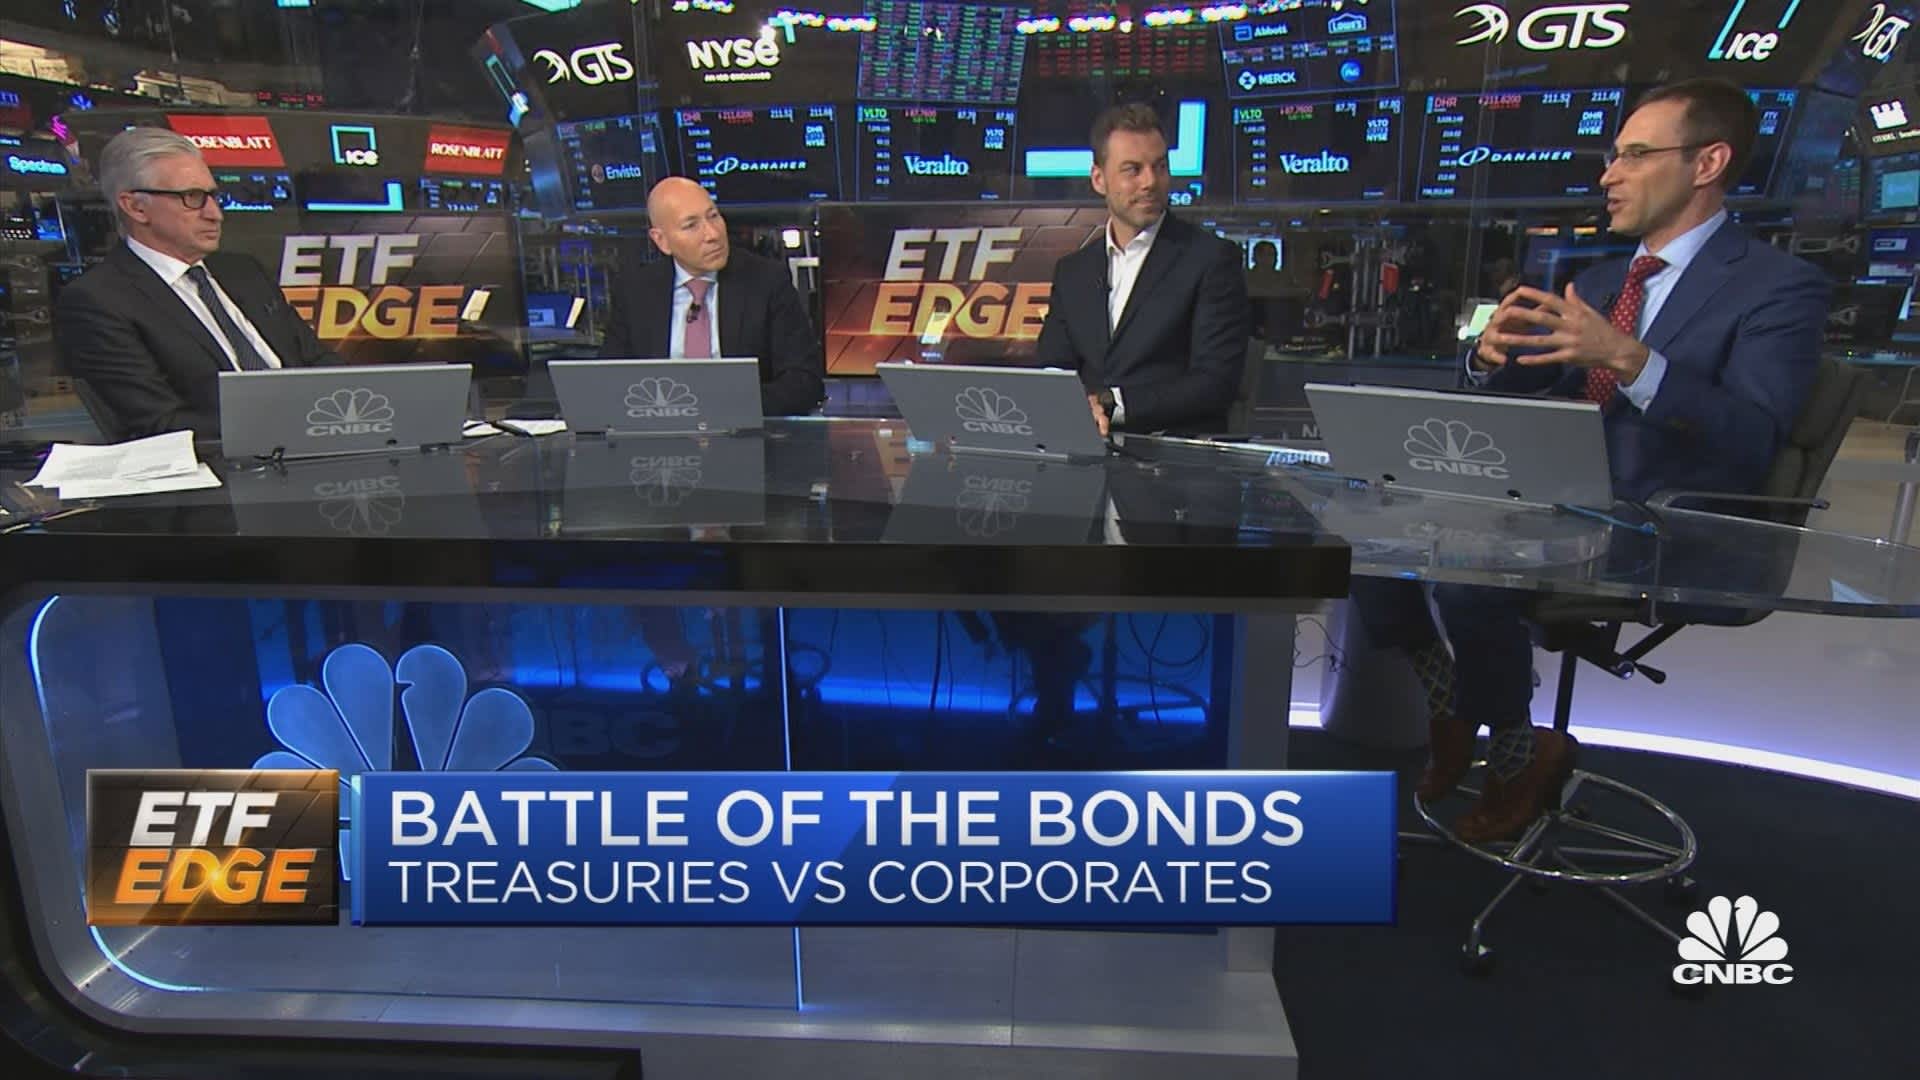 Battle of the bonds: more funds but with more complexity